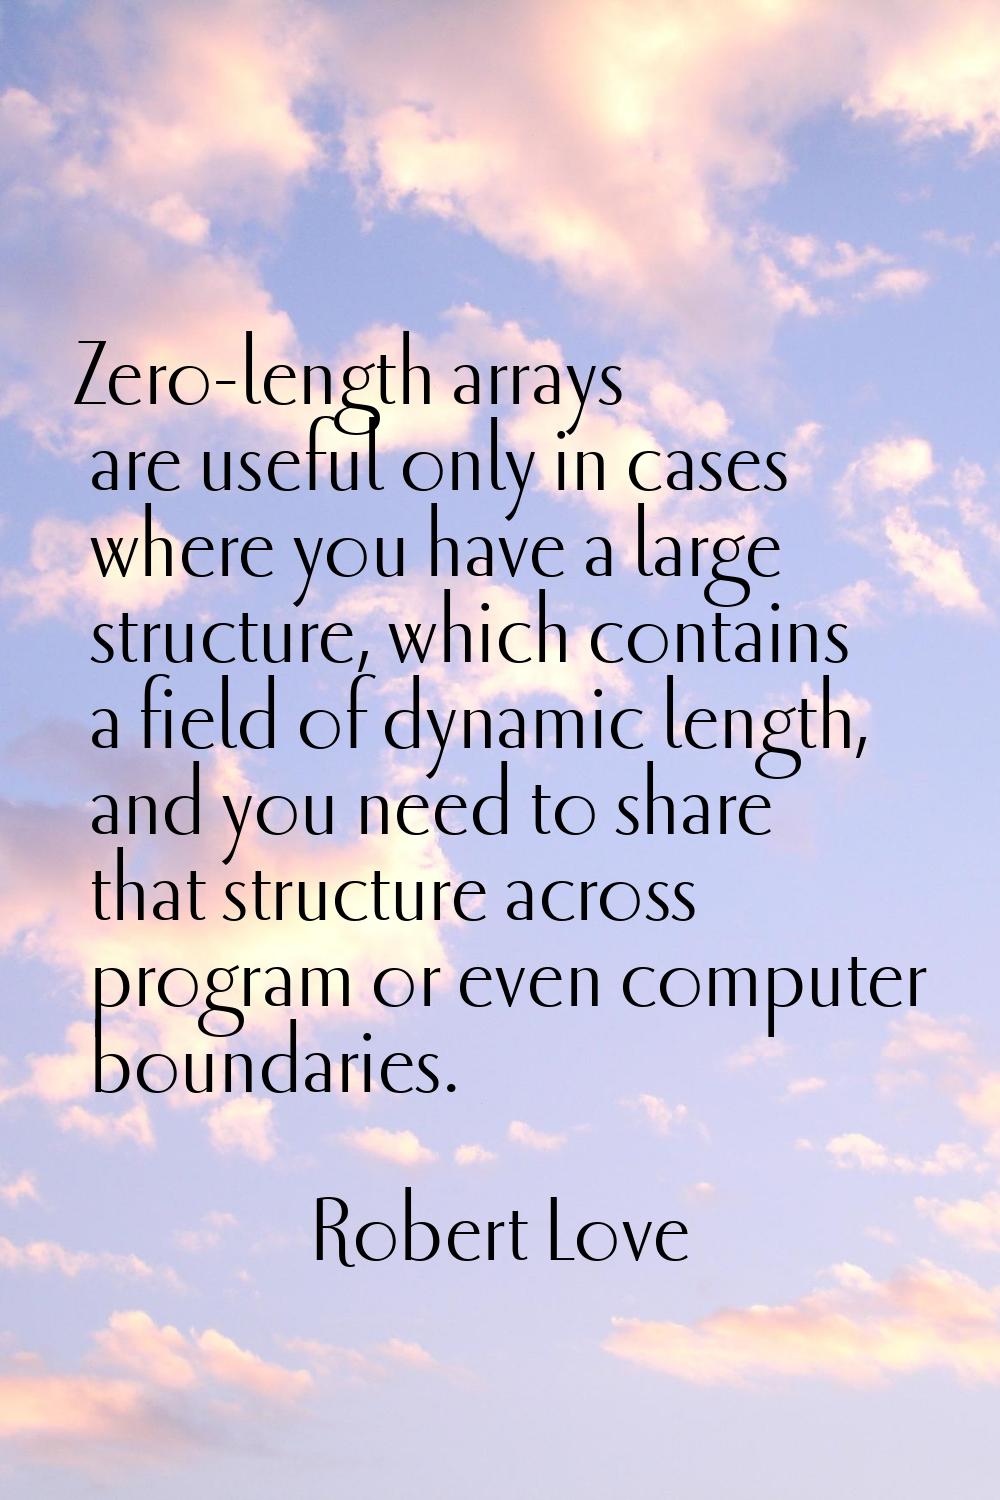 Zero-length arrays are useful only in cases where you have a large structure, which contains a fiel